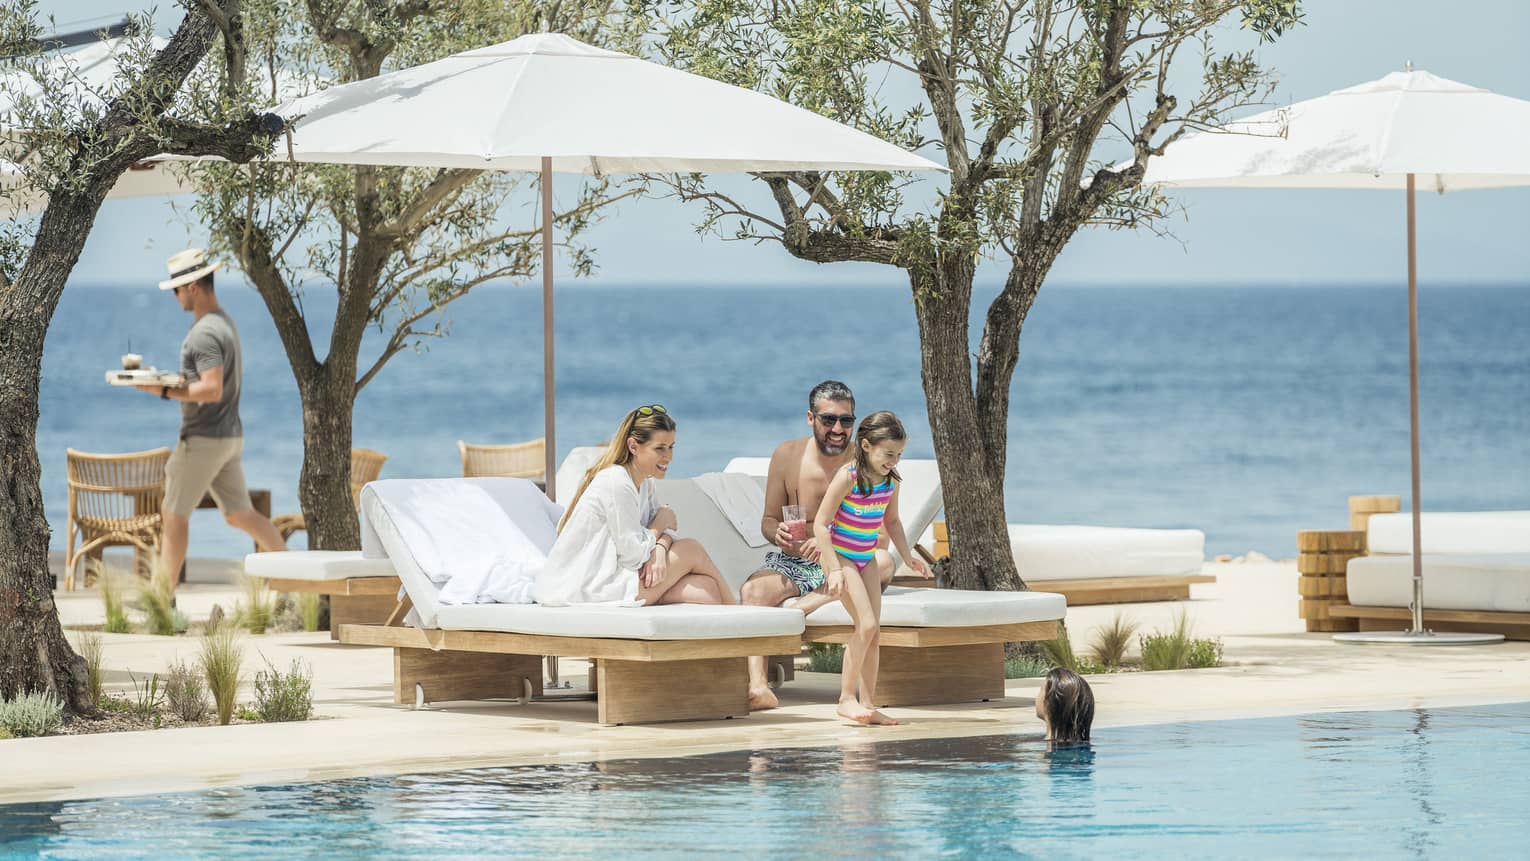 A man and woman sit on white lounge chairs while their two kids play in the pool overlooking the ocean